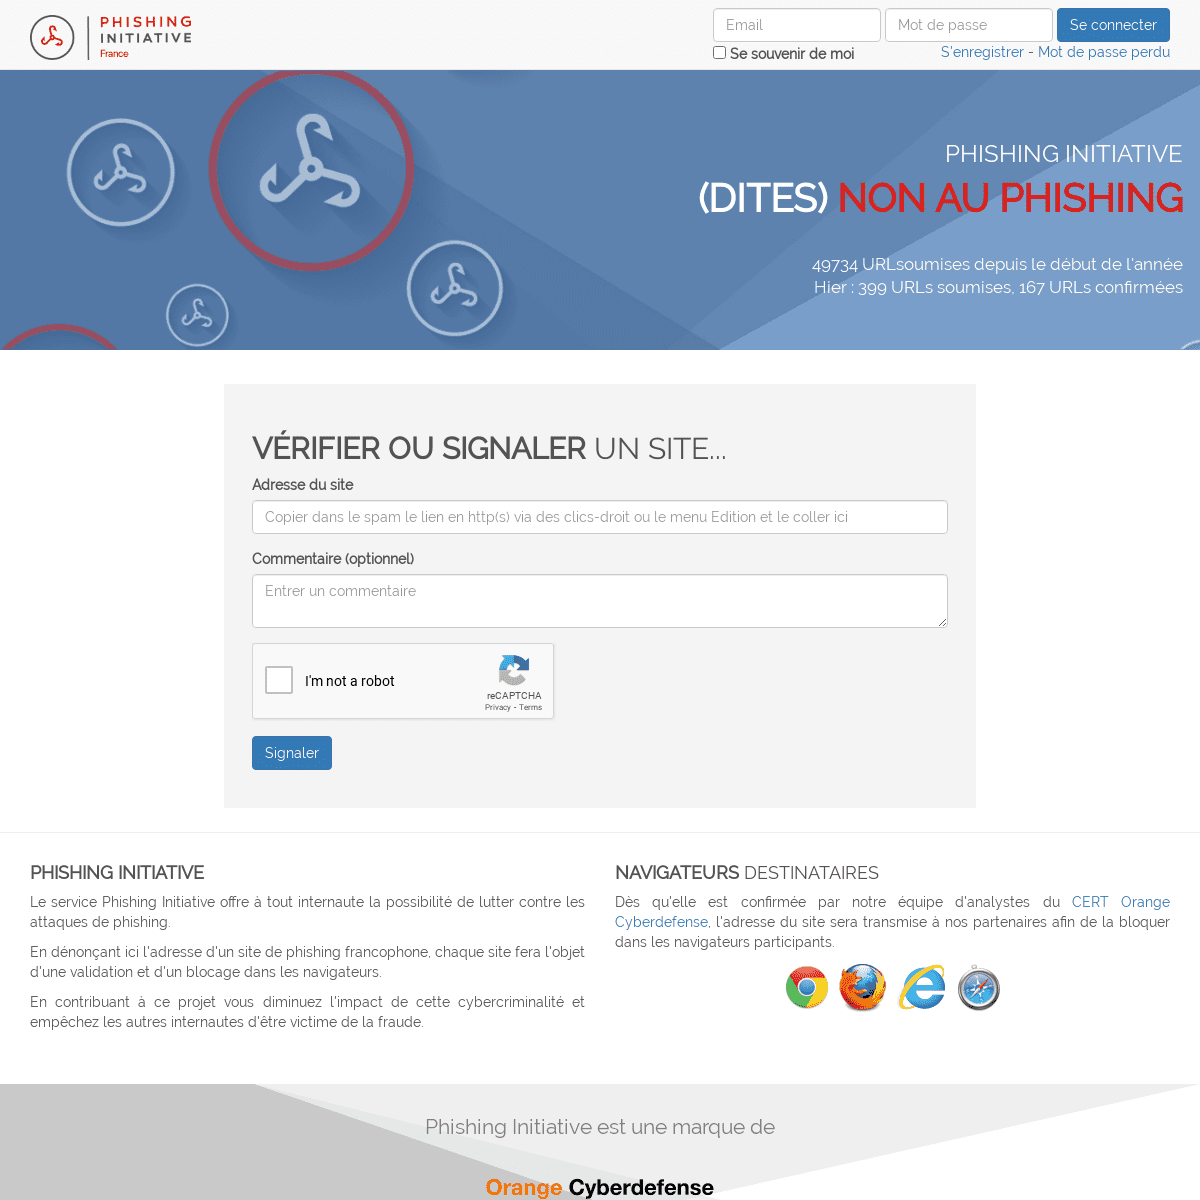 A complete backup of https://phishing-initiative.fr